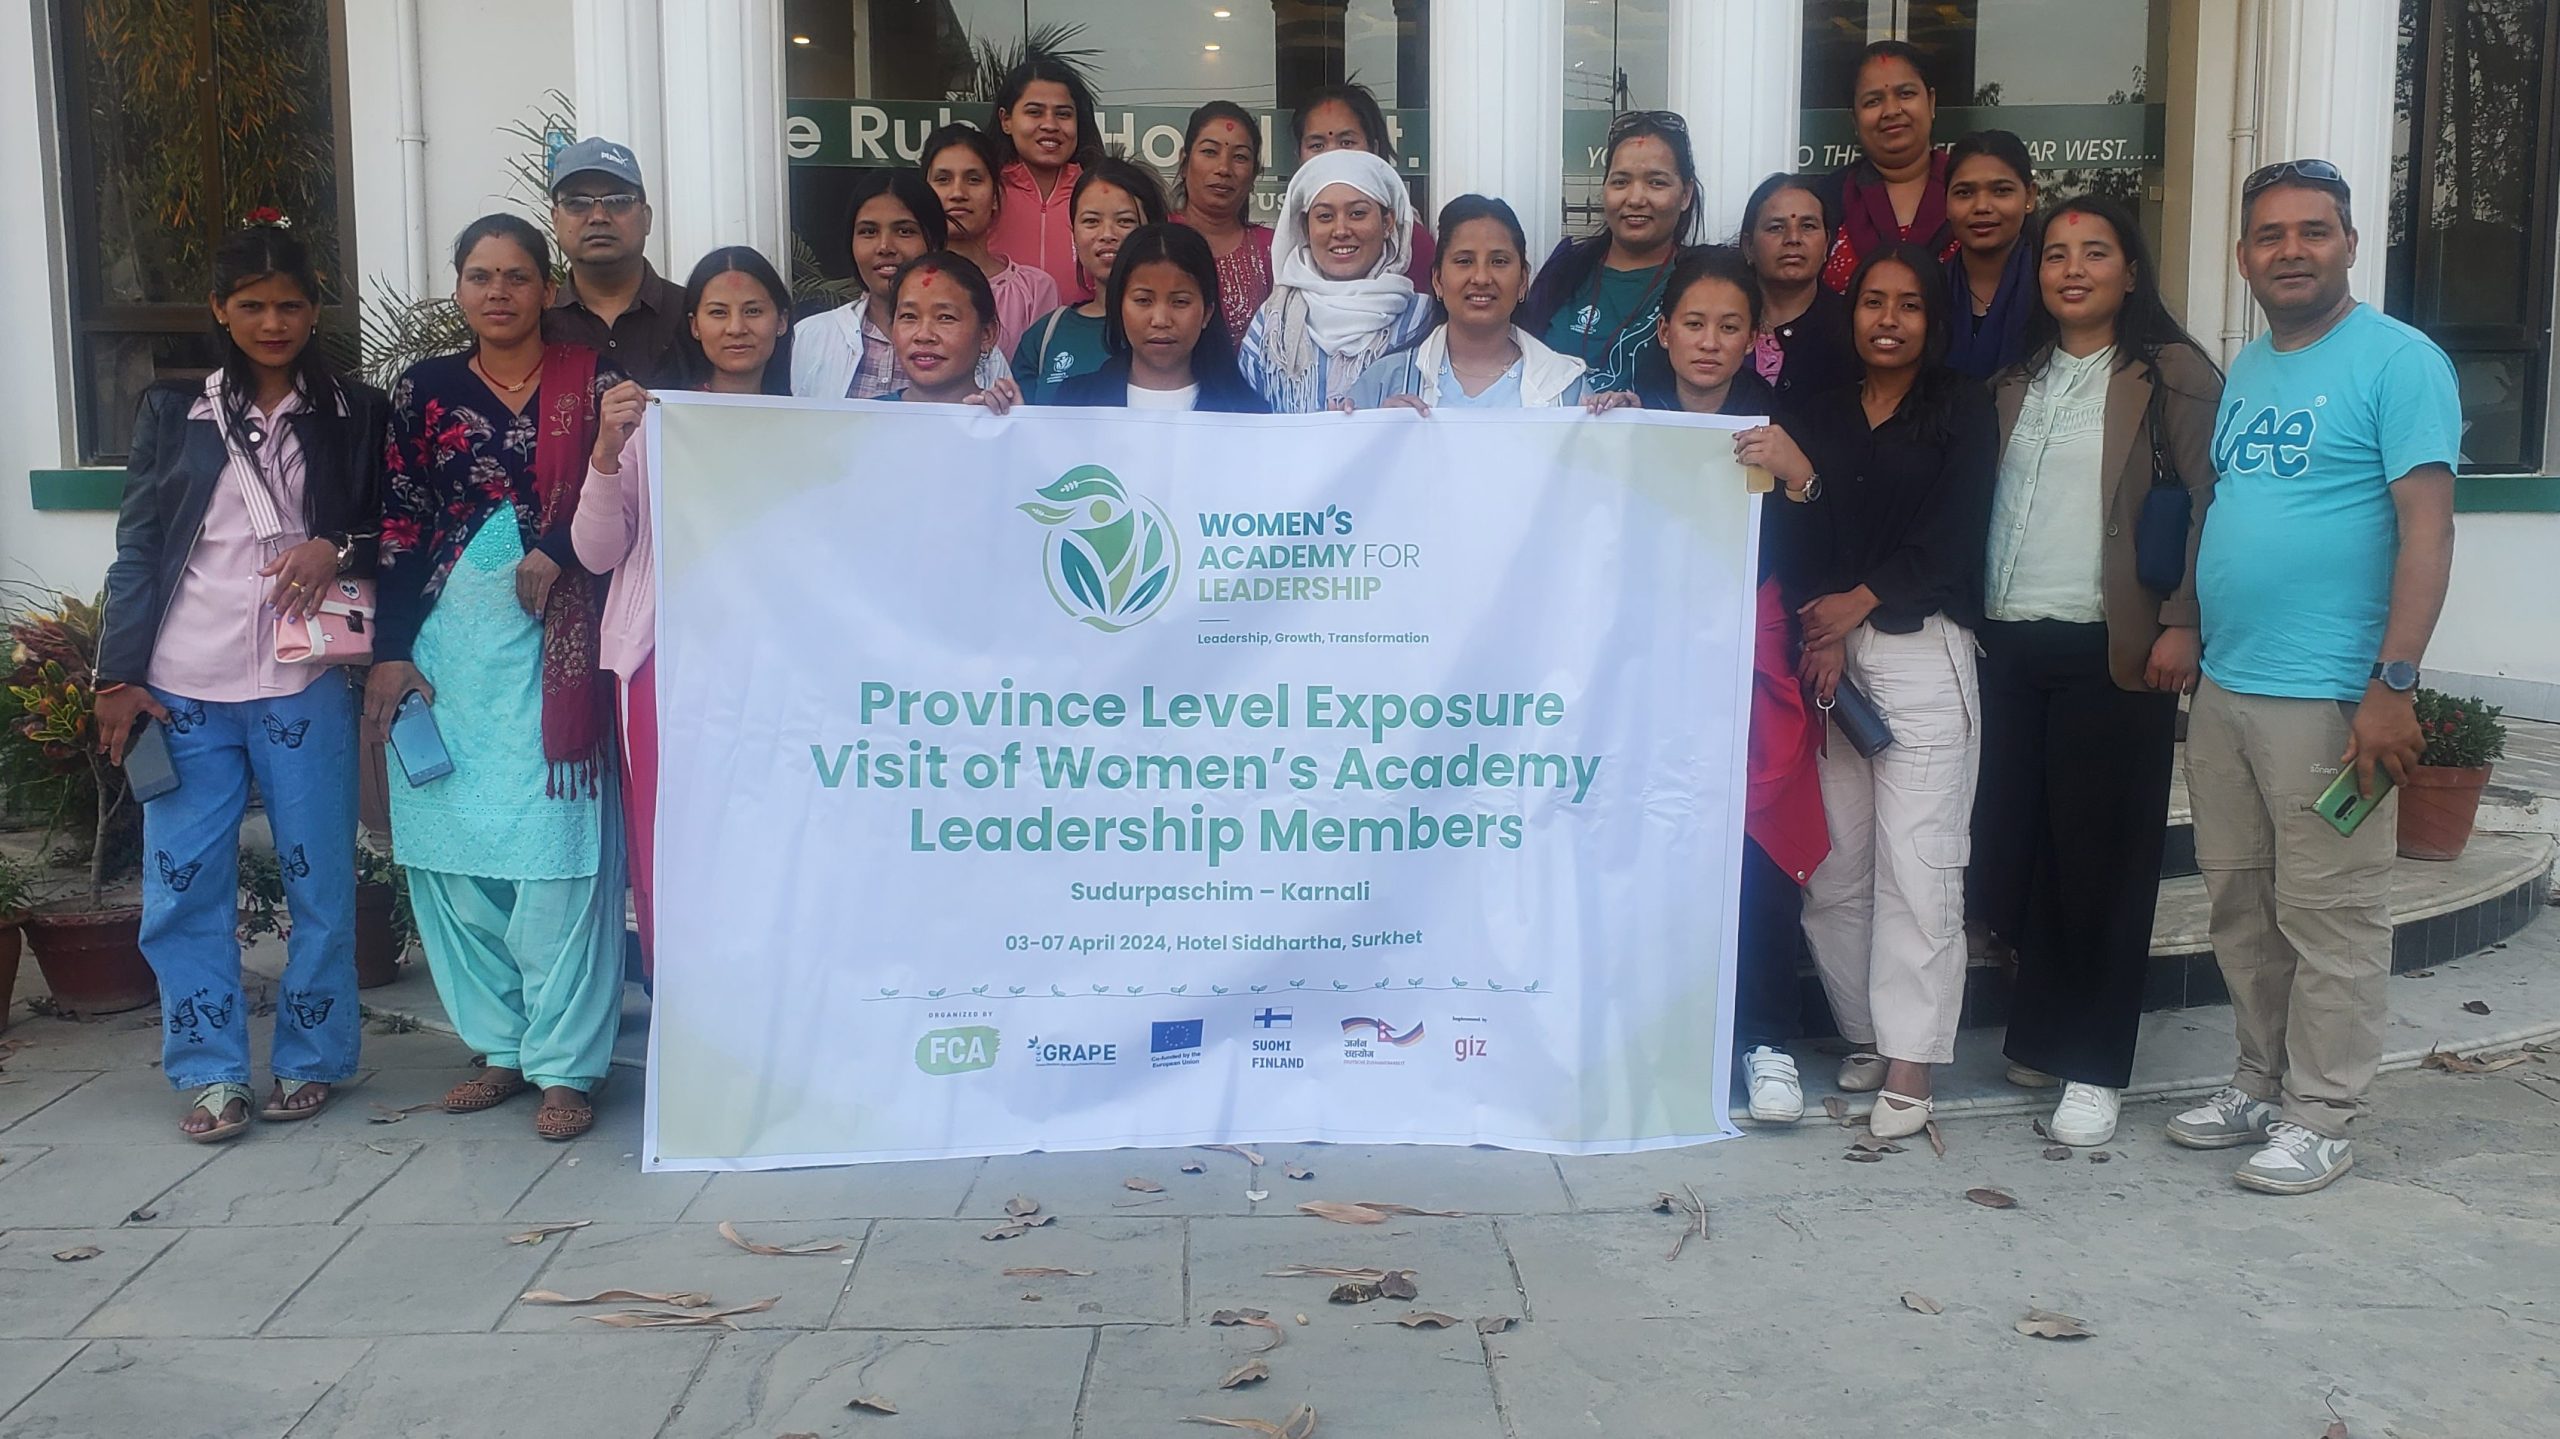 A group of people stand outside a building, posing for a photo and holding a large banner which reads: "WOMEN'S ACADEMY FOR LEADERSHIP. Province Level Exposure Visit of Women's Academy Leadership Members/Sudurpaschim - Karnali"